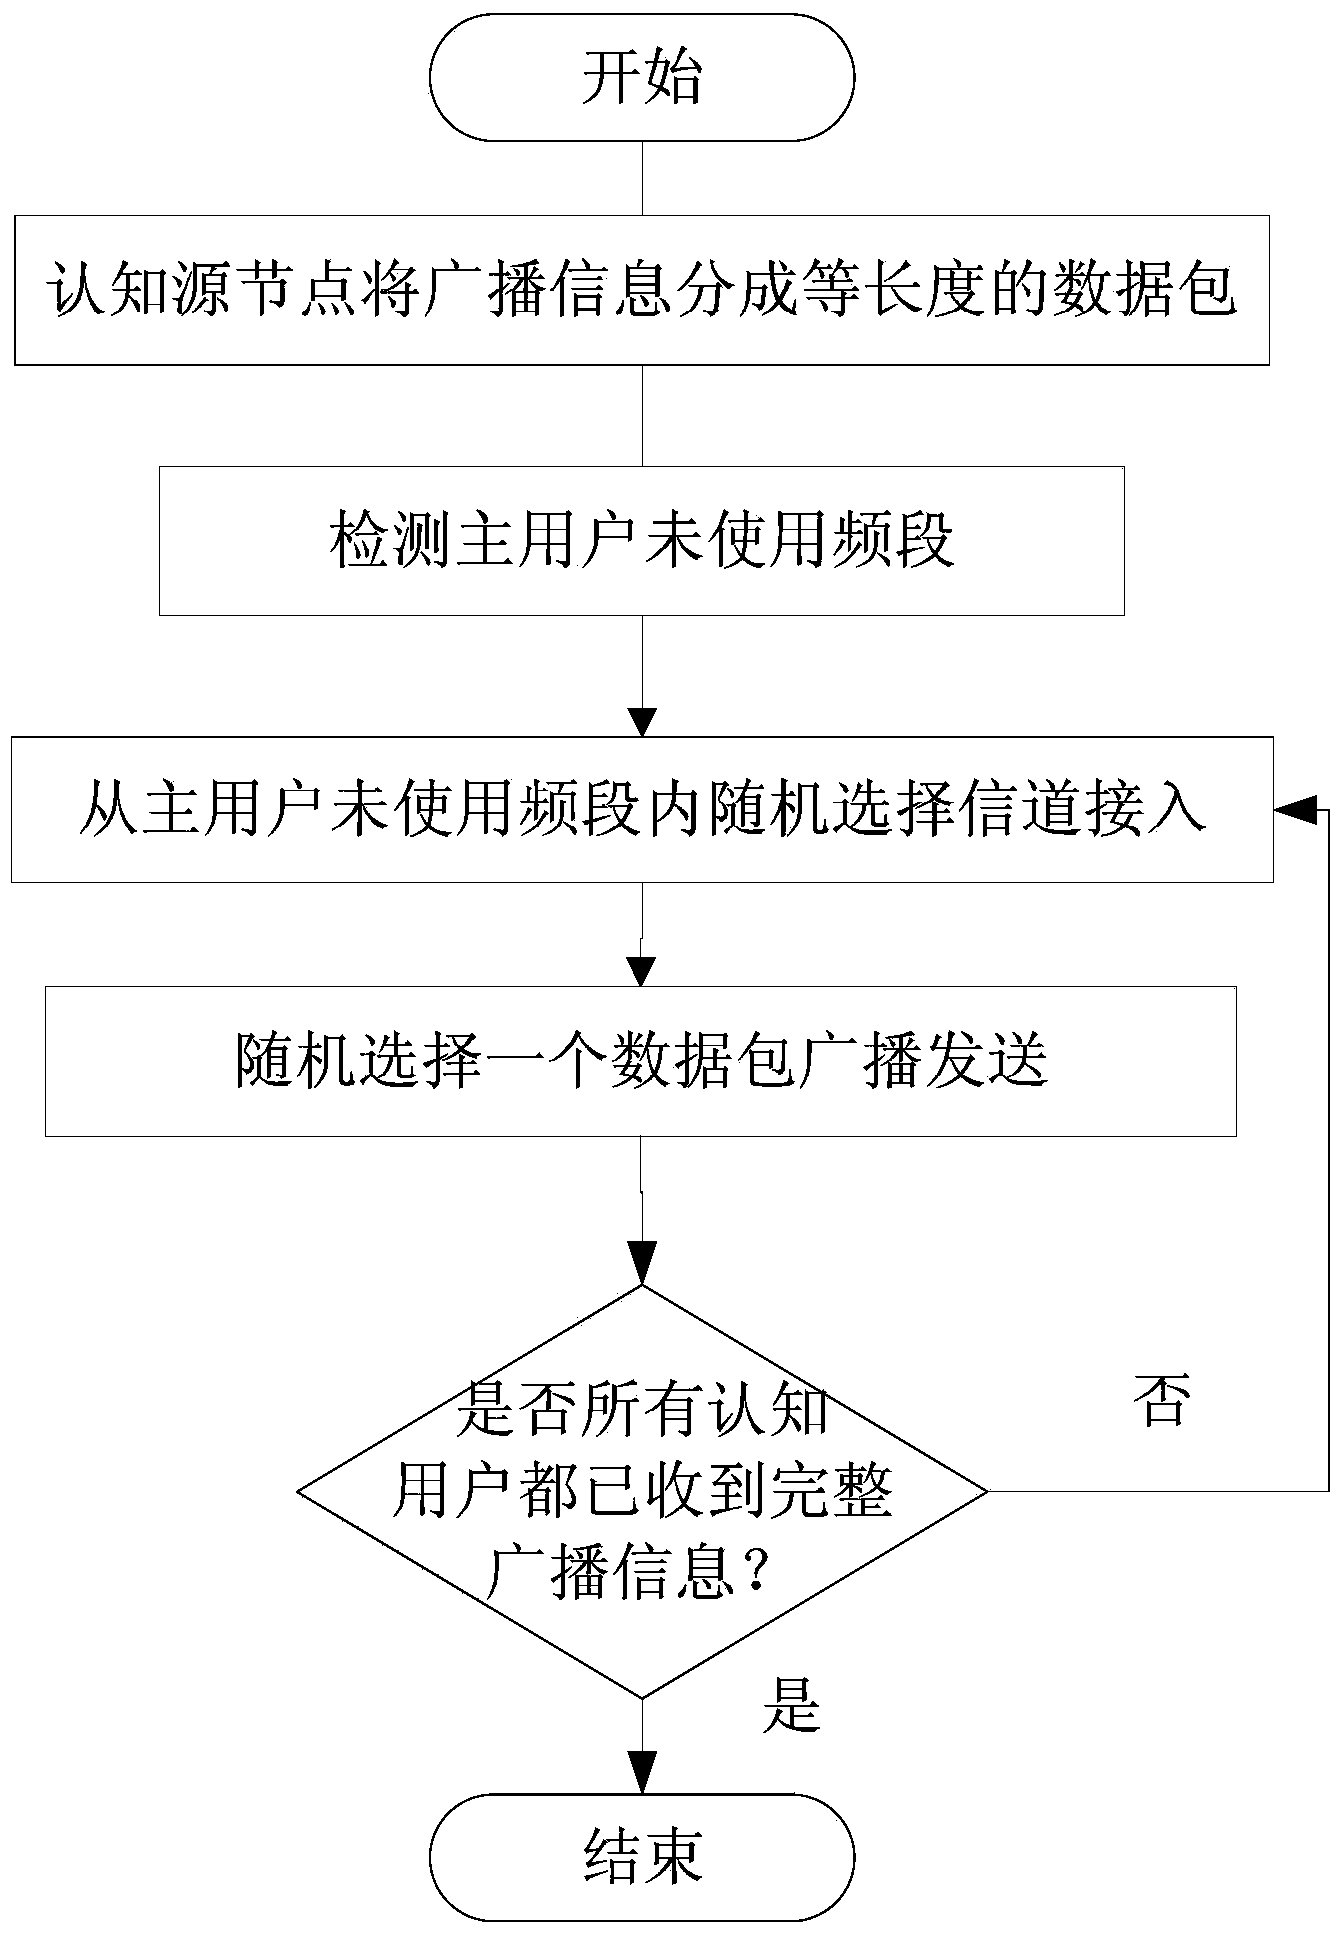 Cognitive radio network anti-hostile interference cooperative broadcasting method based on non-coordinated frequency hopping